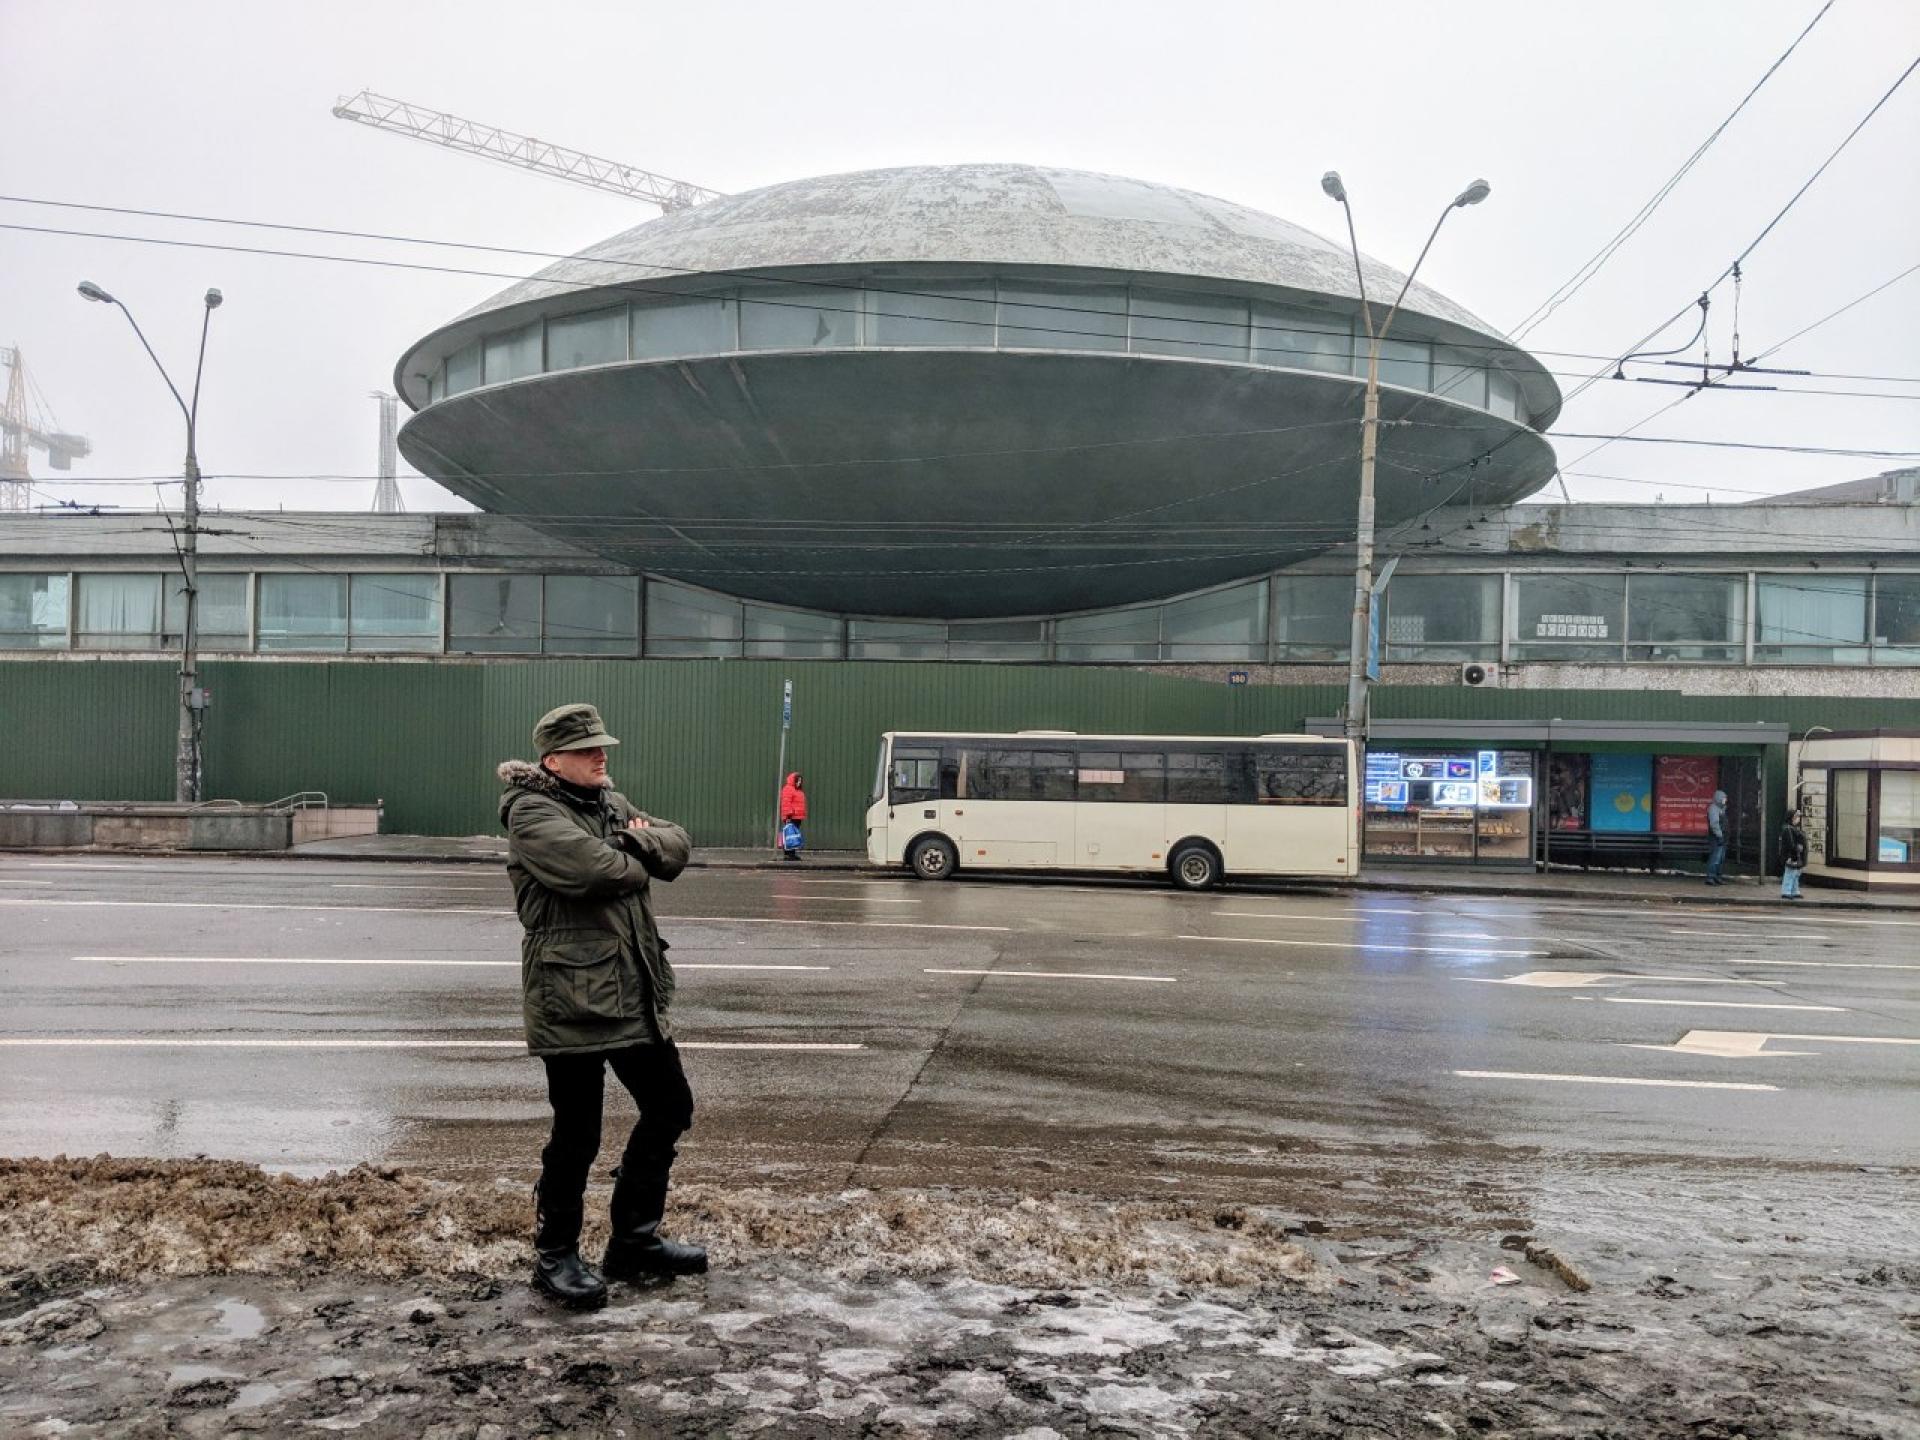 Kyiv’s Flying Saucer was an experimental space. | Photo © Alex Moore